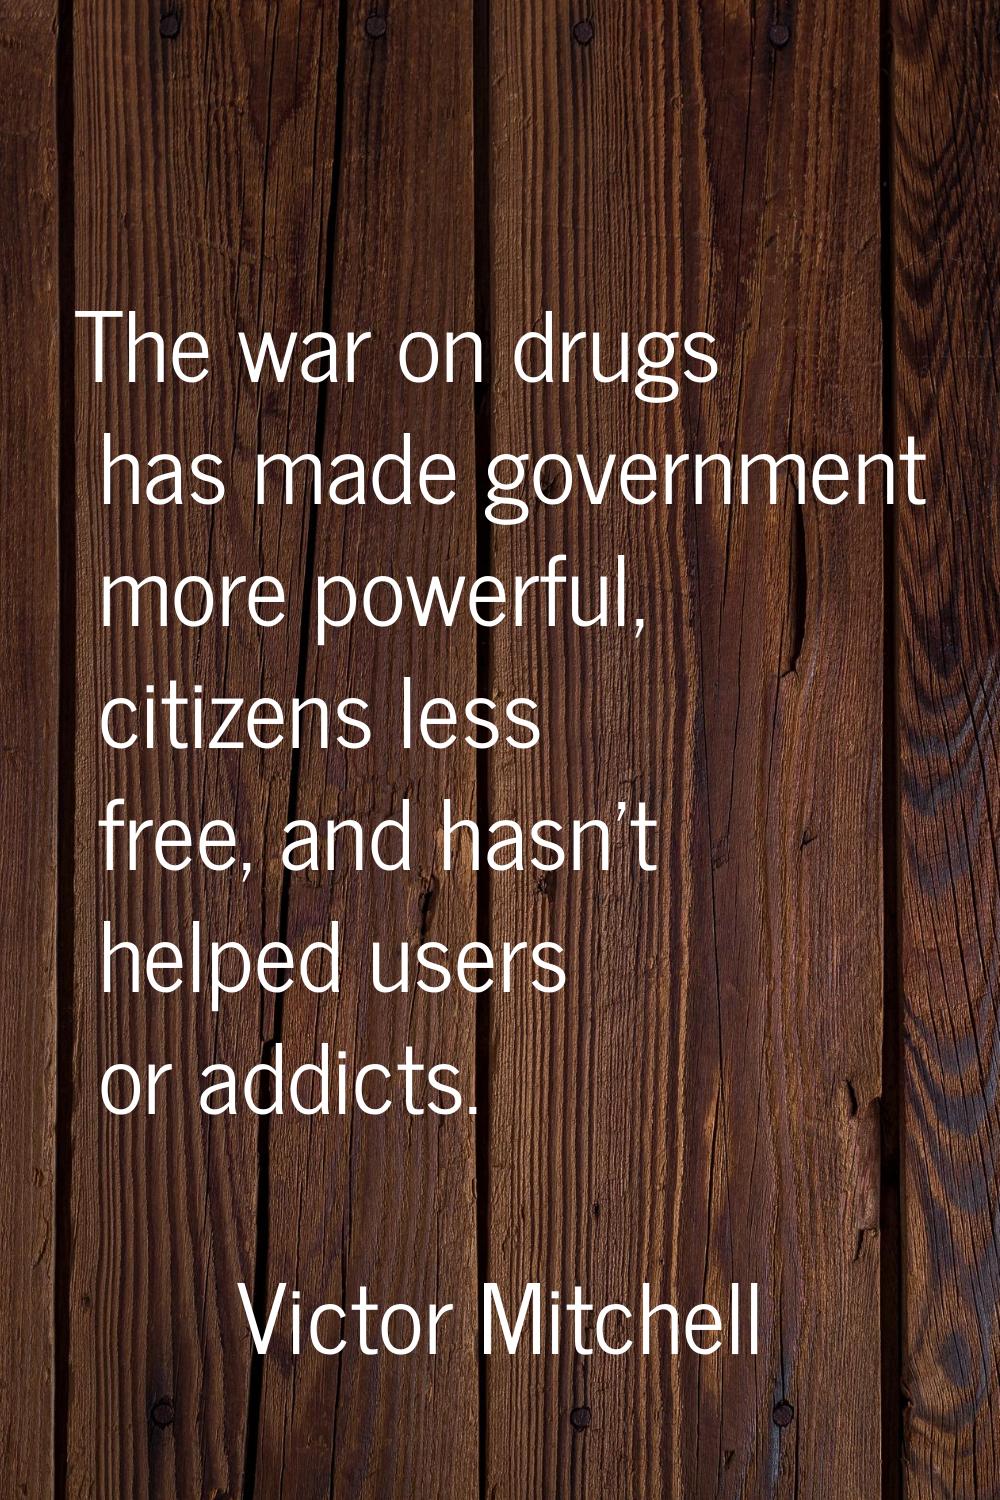 The war on drugs has made government more powerful, citizens less free, and hasn't helped users or 